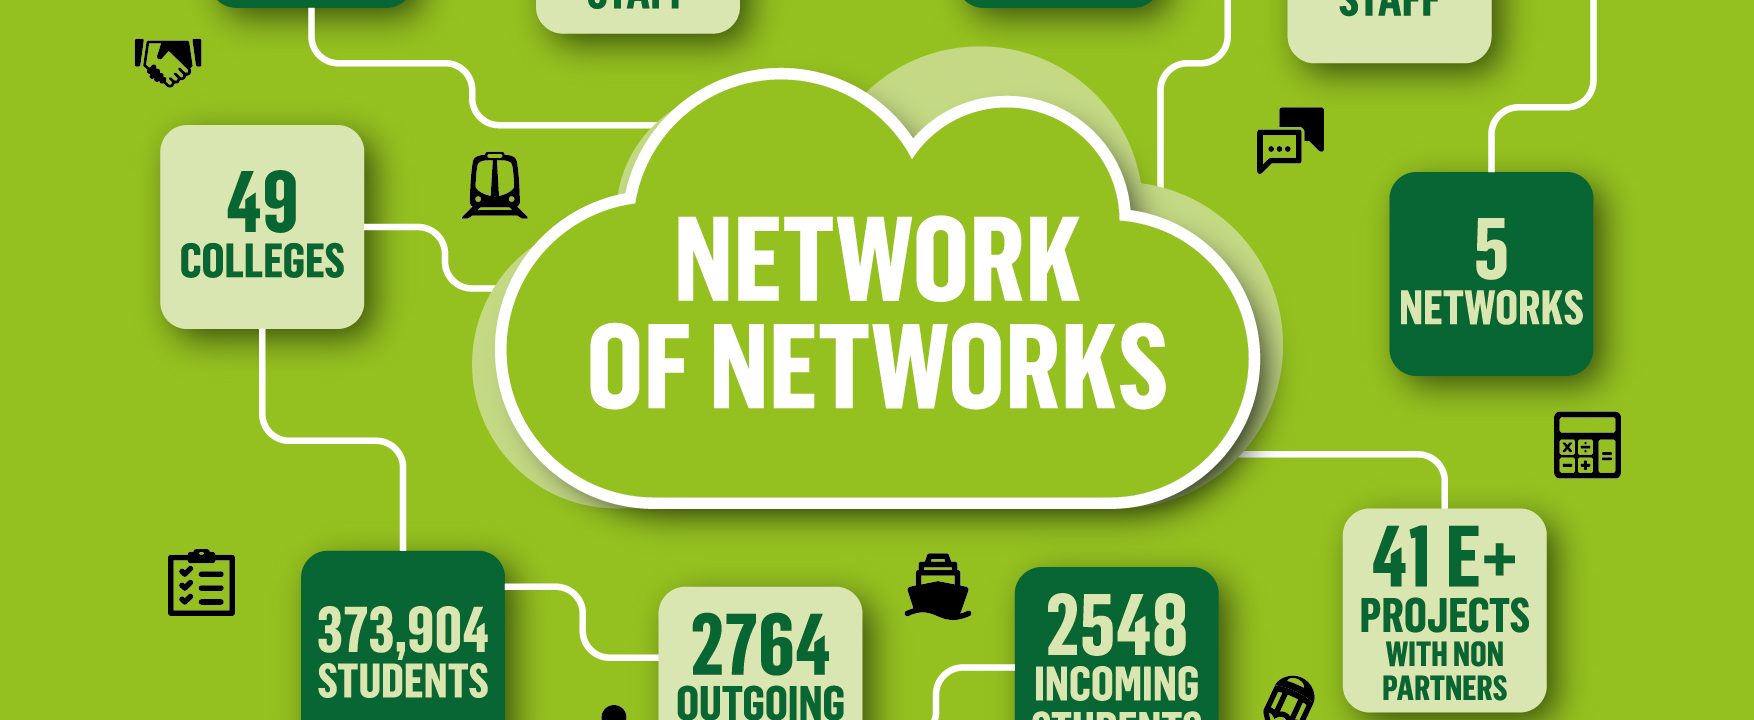 CD_Network_of_Networks_Infographic_AW_MR